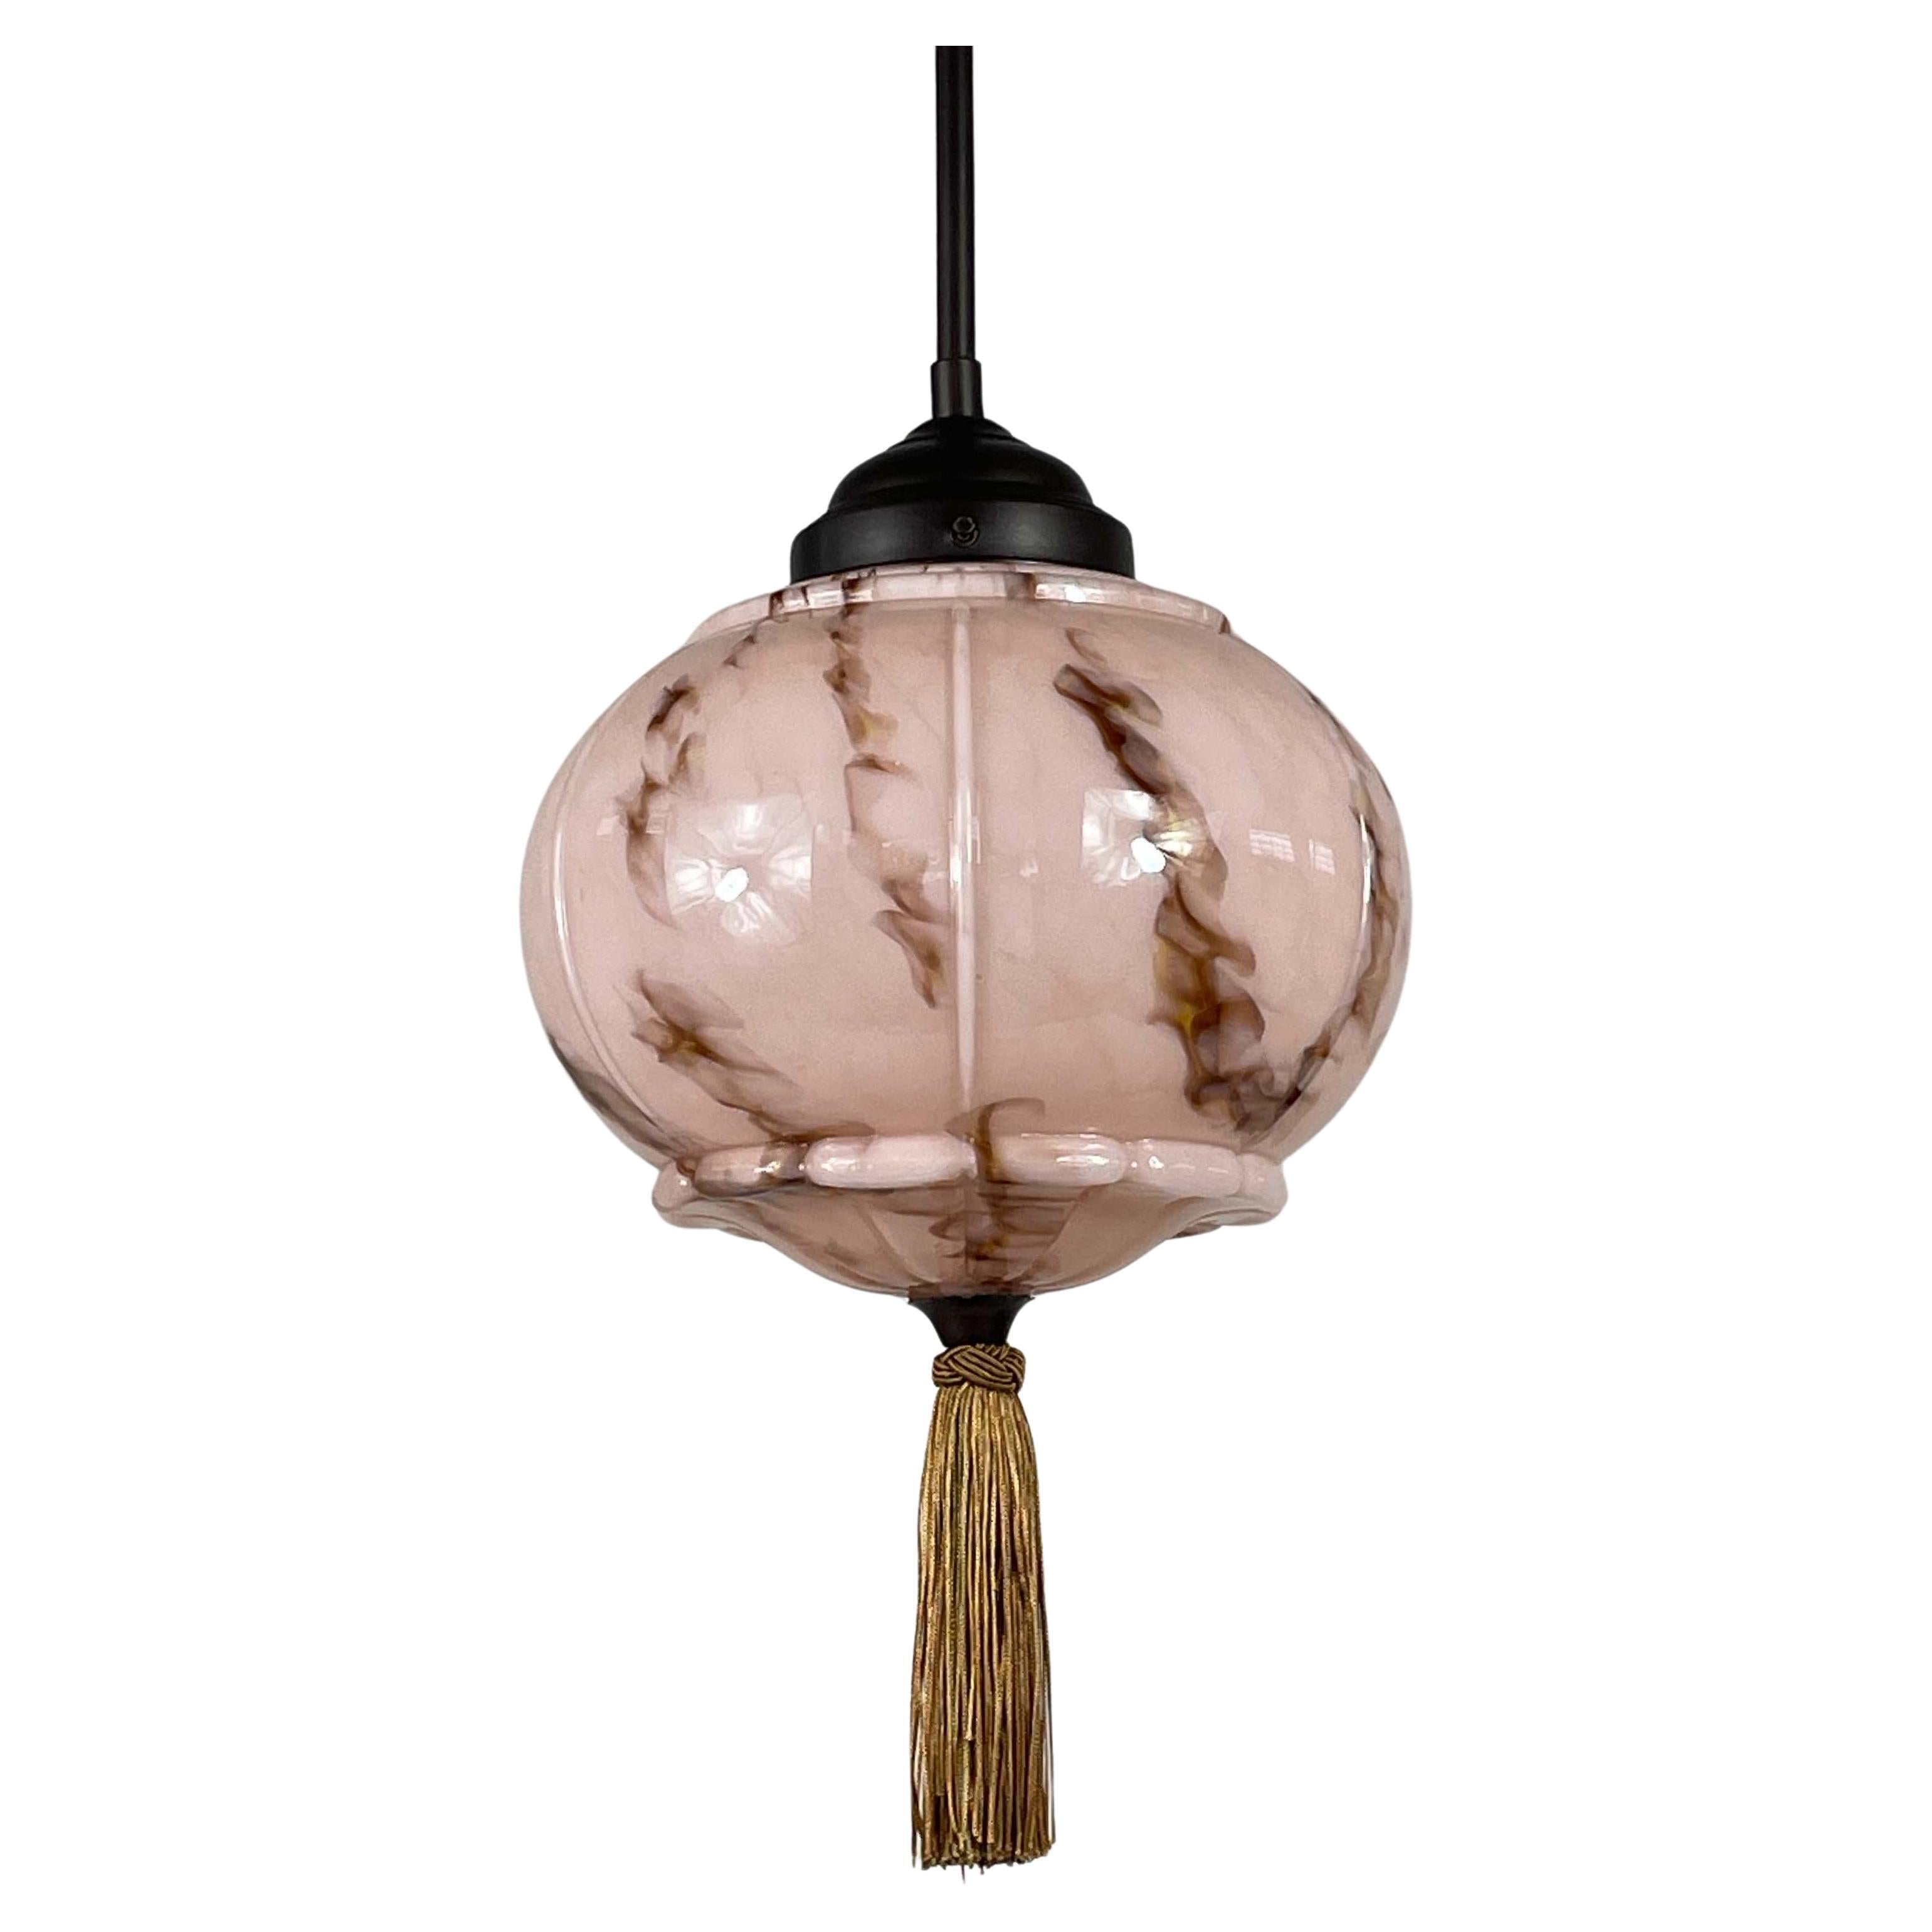 Marbled Pale Rose Opaline & Bronzed Pendant with Tassel, Germany 1920s 1930s